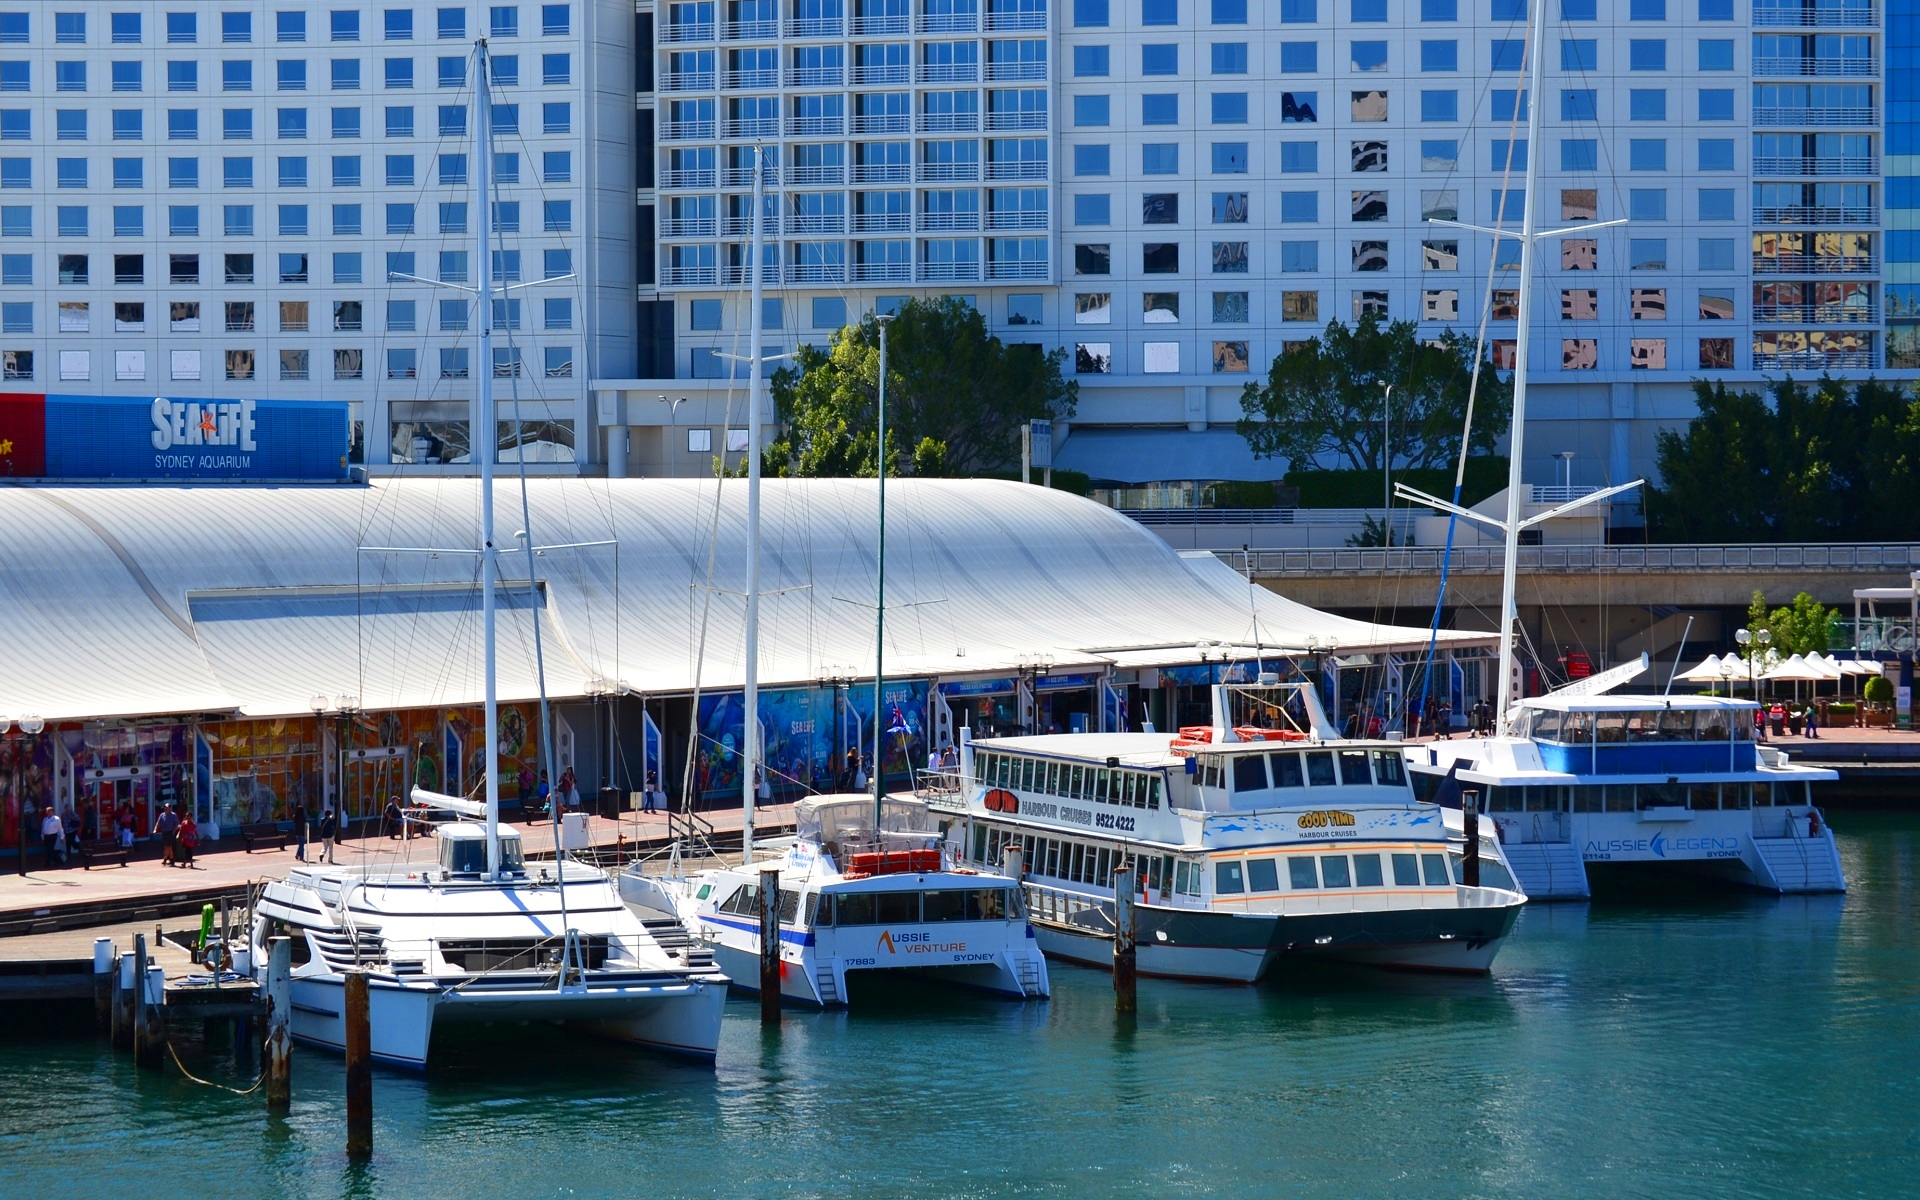 man made, darling harbour, boat, ferry, harbor, pier, sydney, yacht